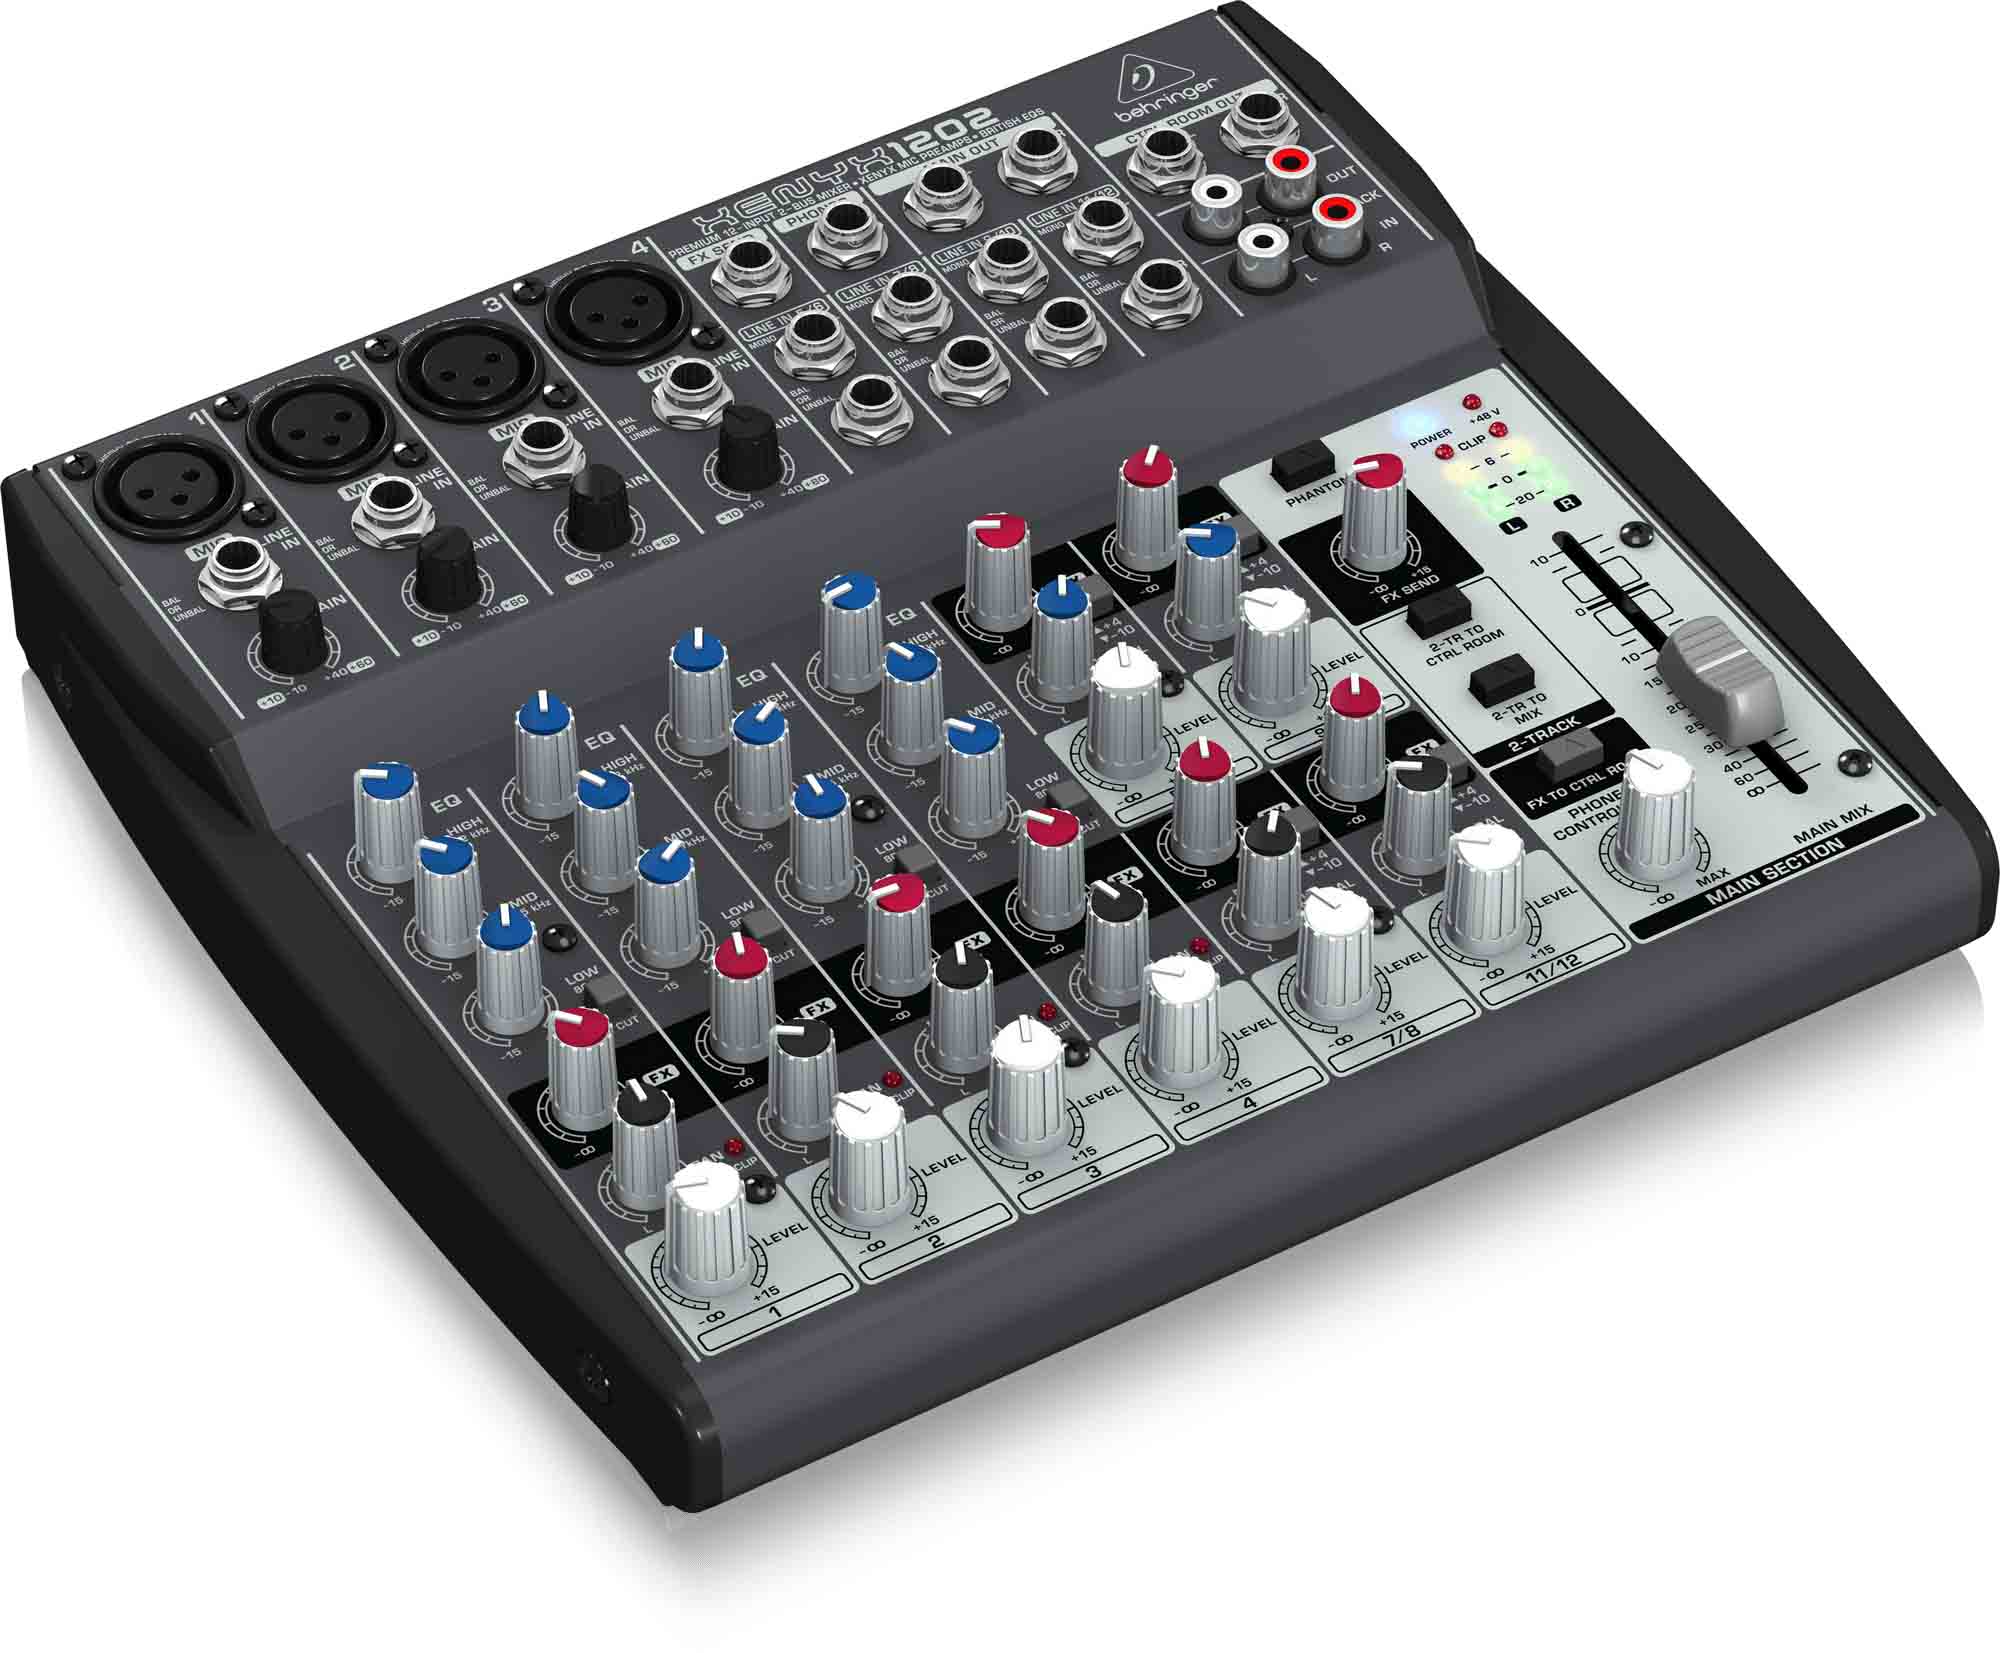 B-Stock: Behringer 1202 Premium 12-Input 2-Bus Mixer with XENYX Mic Preamps and British EQs - Hollywood DJ